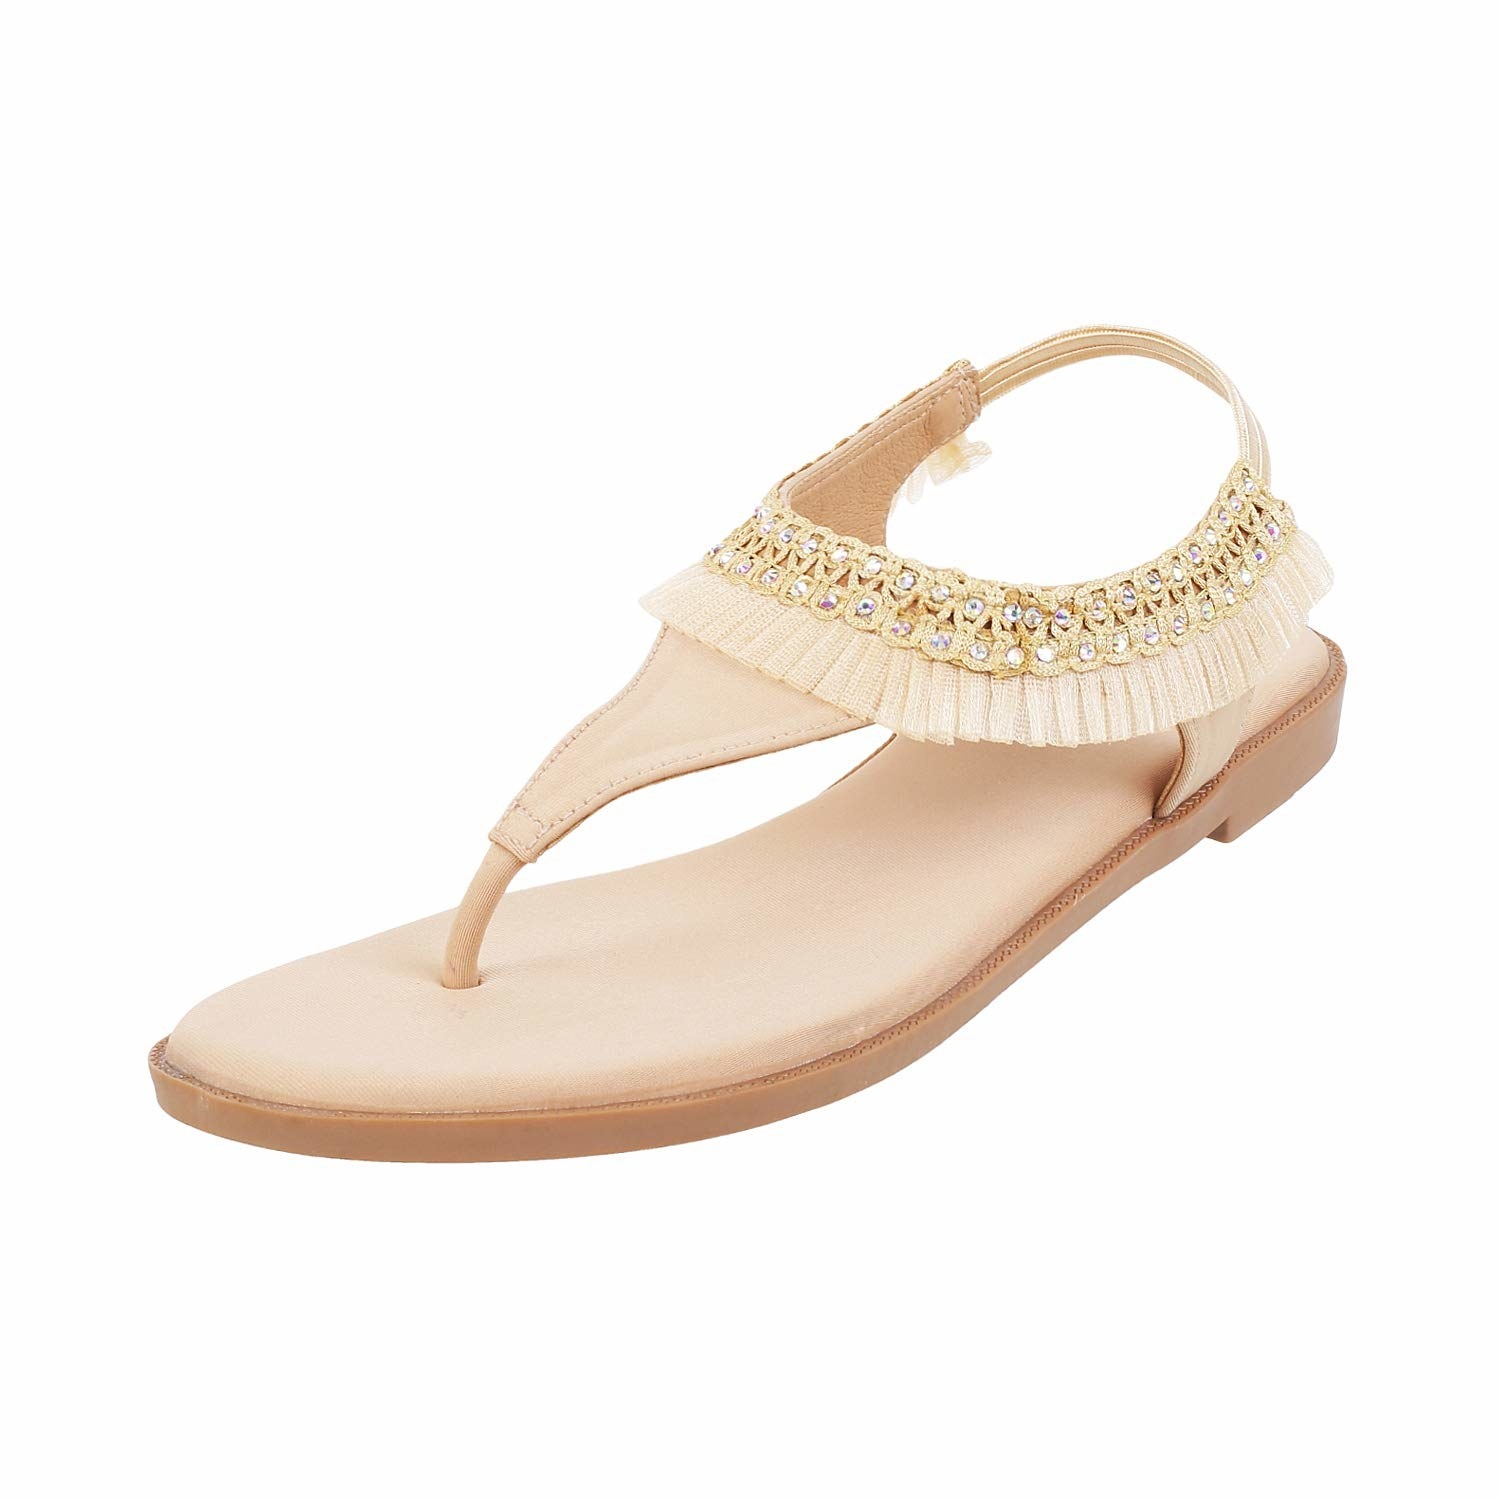 A gold and beige sandal with a gold and white frill design on the ankles strap